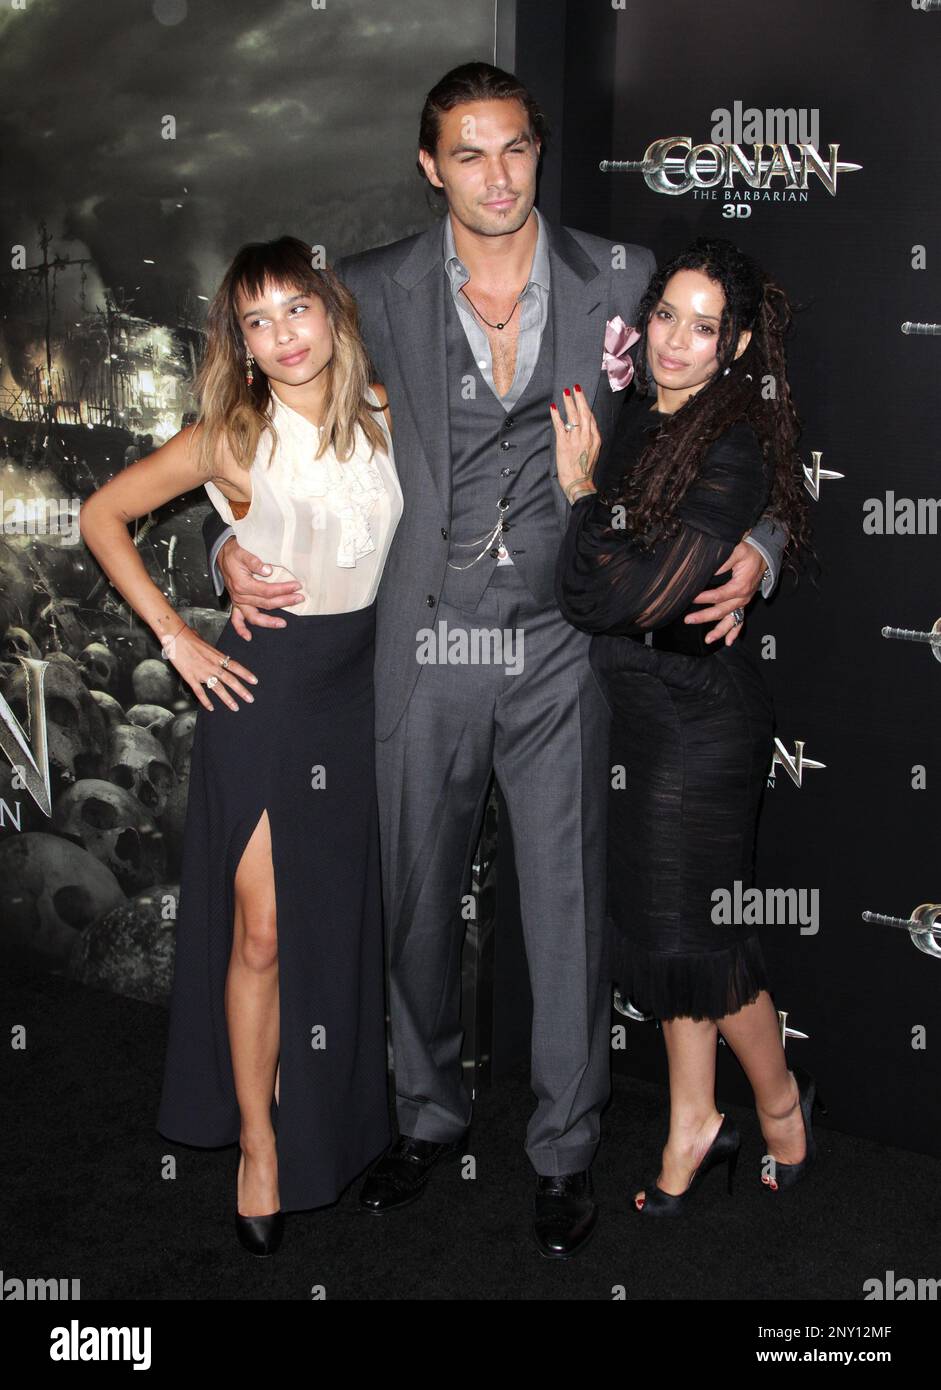 Zoe Kravitz, Jason Momoa, Lisa Bonet in attendance; The World Premiere of 'Conan The Barbarian' held at the Regal Cinemas L.A. Live Stadium 14 in Los Angeles, California on August 11th, 2011.  Credit: RD/ MediaPunch / MediaPunch Stock Photo